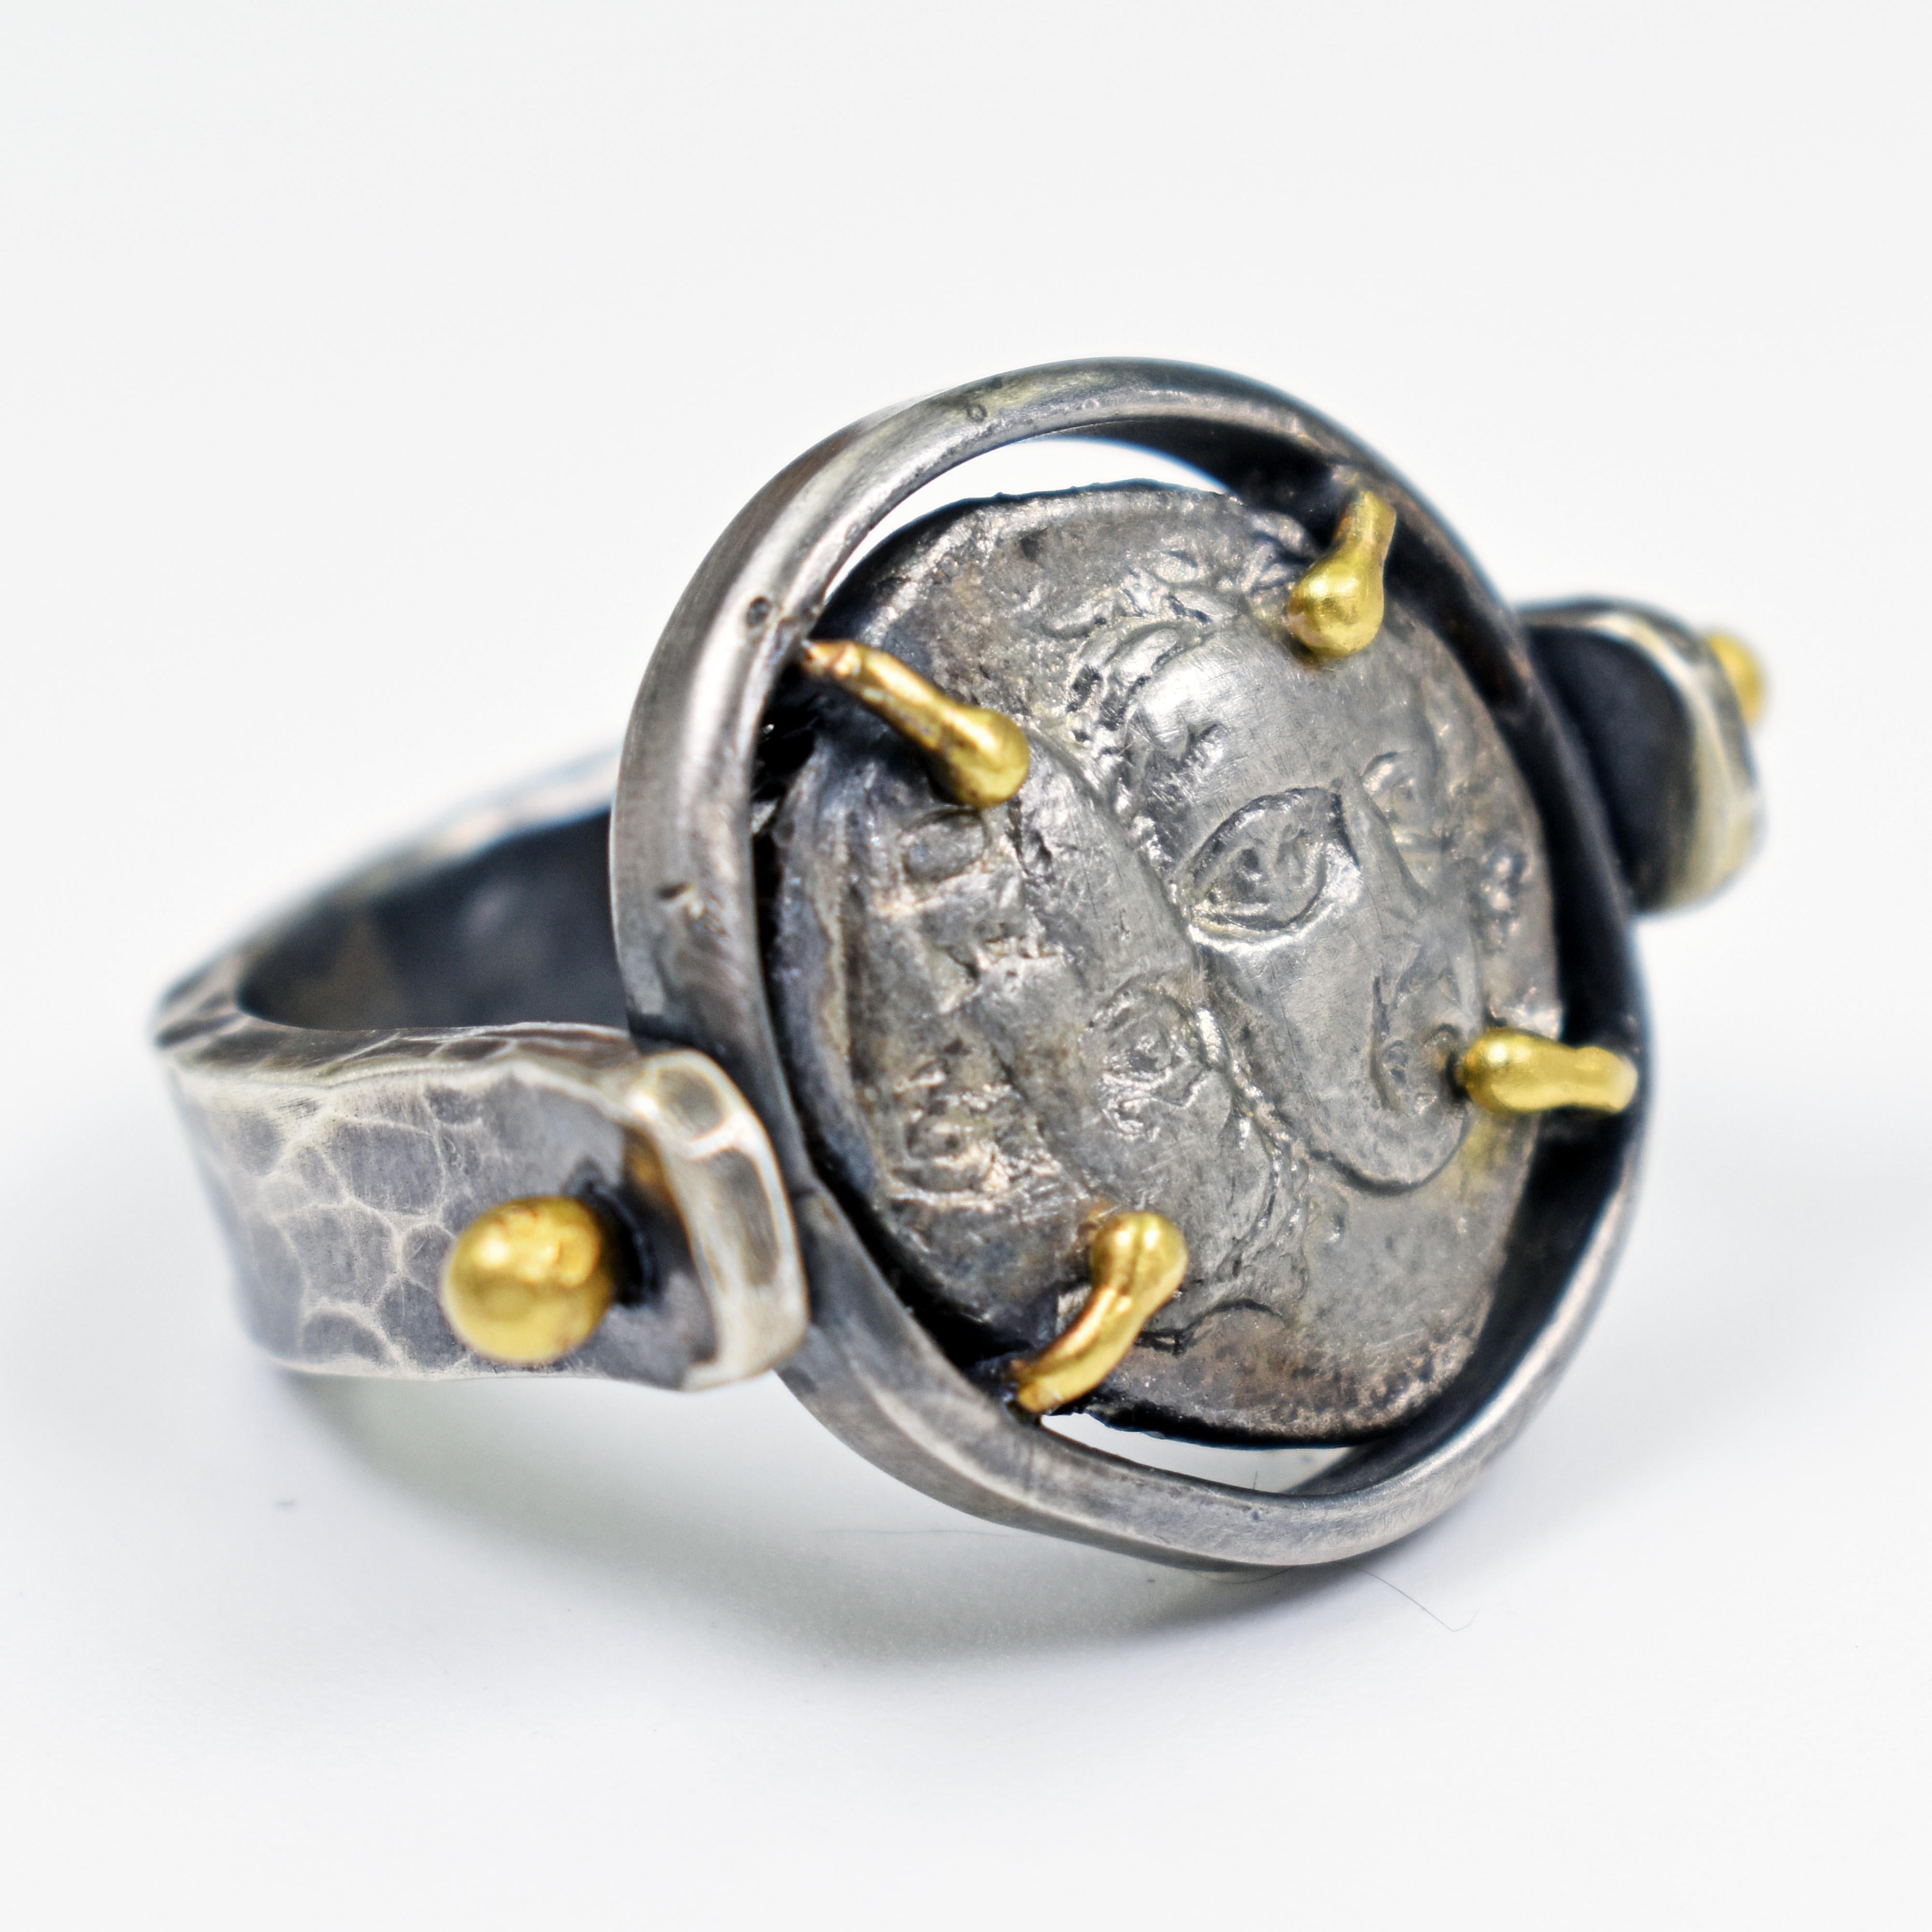 Authentic ancient Greek silver coin (Thrace, Istros, 400 - 350 BC) set in a hammered, oxidized sterling silver hand-forged flip ring with 22k yellow gold accent prongs. Size 7. Greek coin is approximately 0.69 inches (17.5 mm) long and 0.63 inches